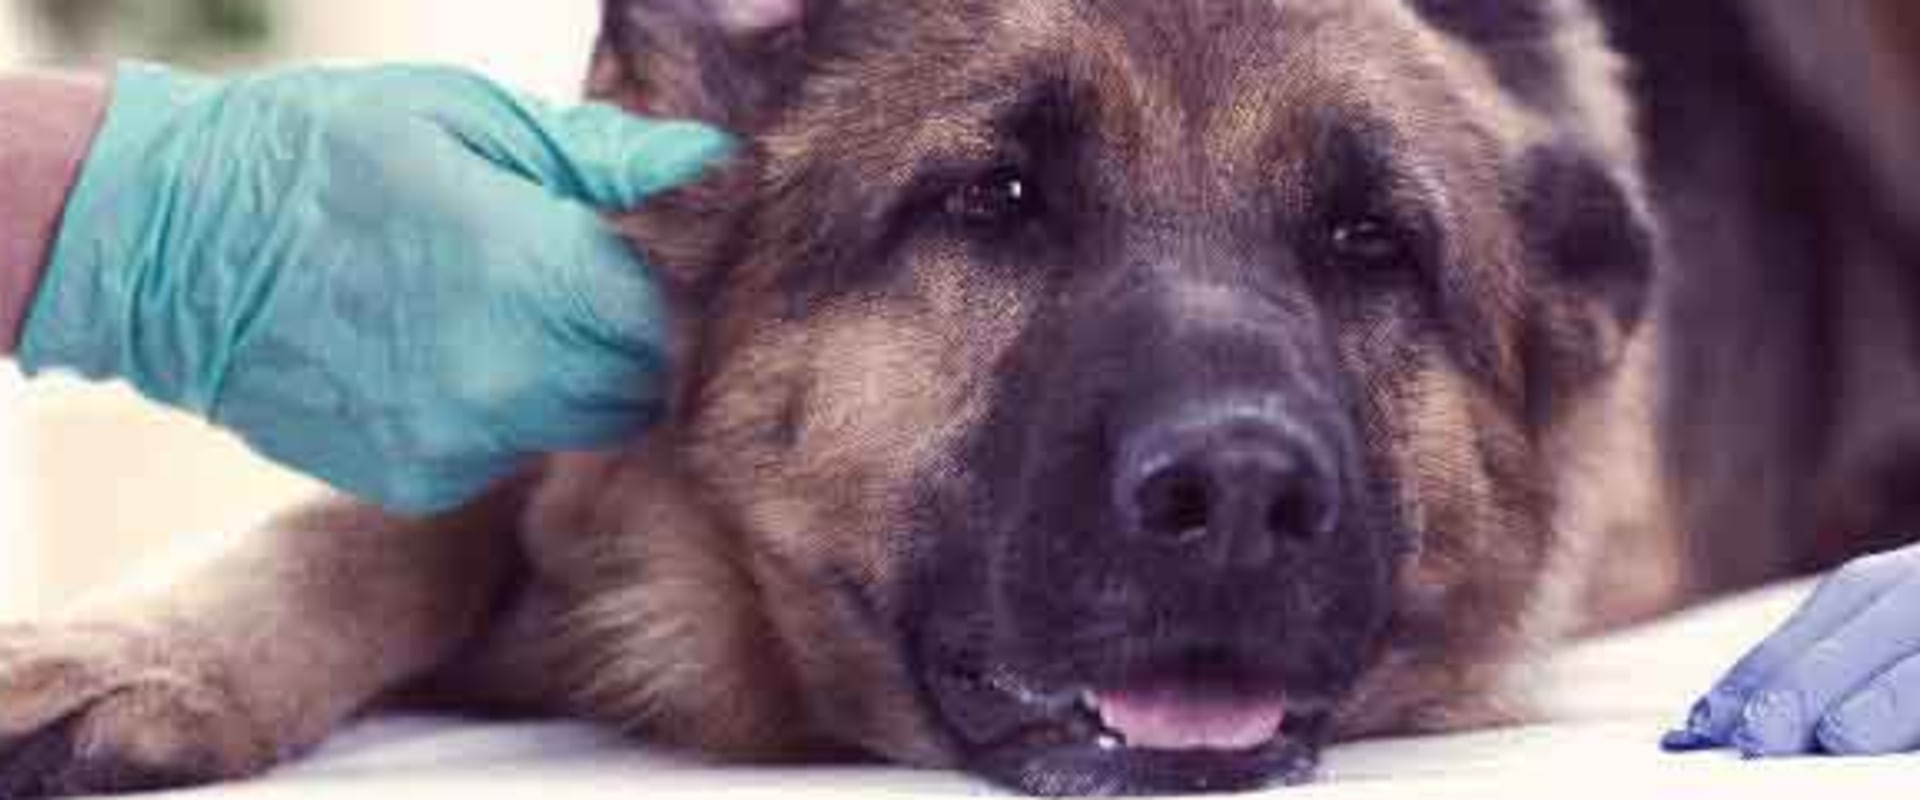 How to Spot if Your Dog is Infected with a Virus